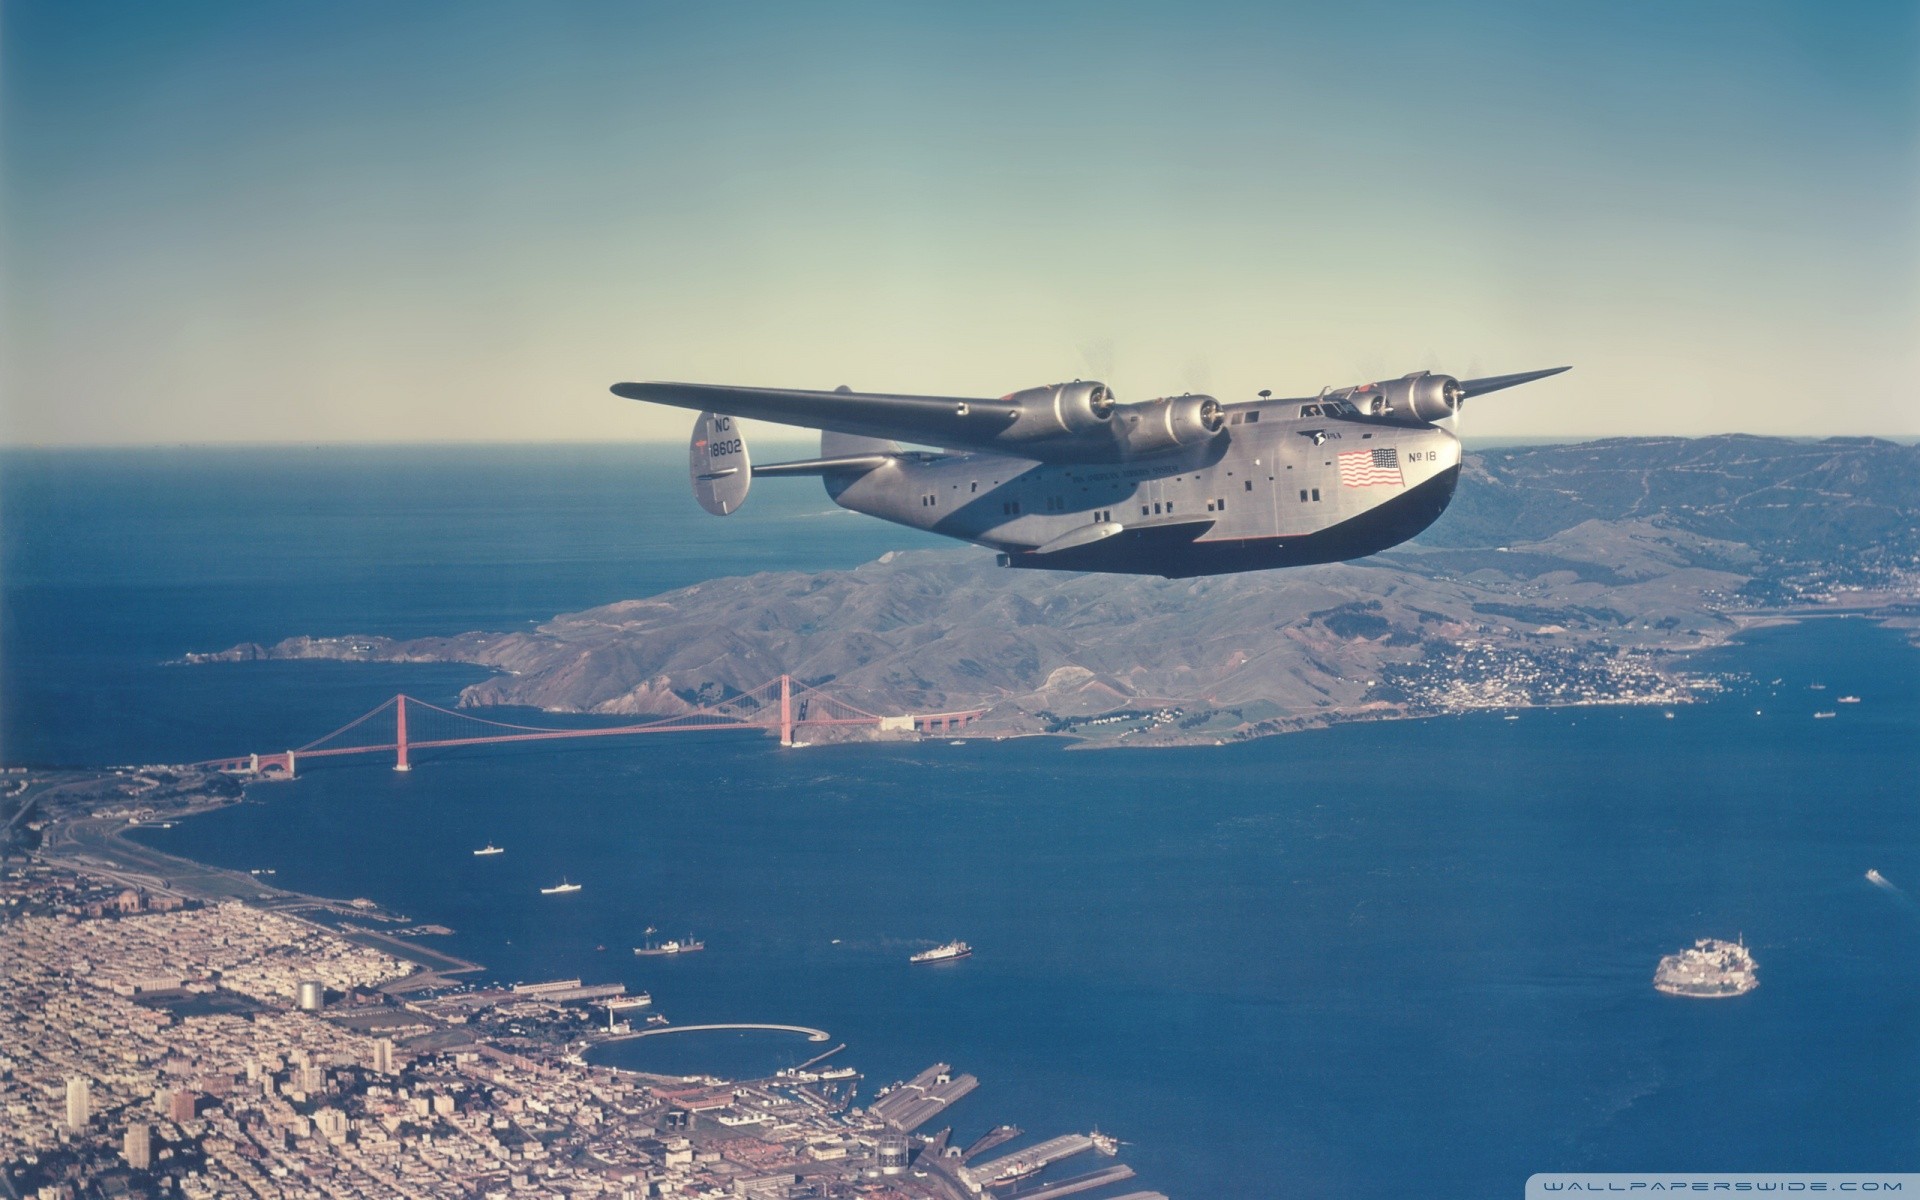 General 1920x1200 aircraft airplane Boeing Seaplane military aircraft military vehicle vehicle San Francisco American aircraft